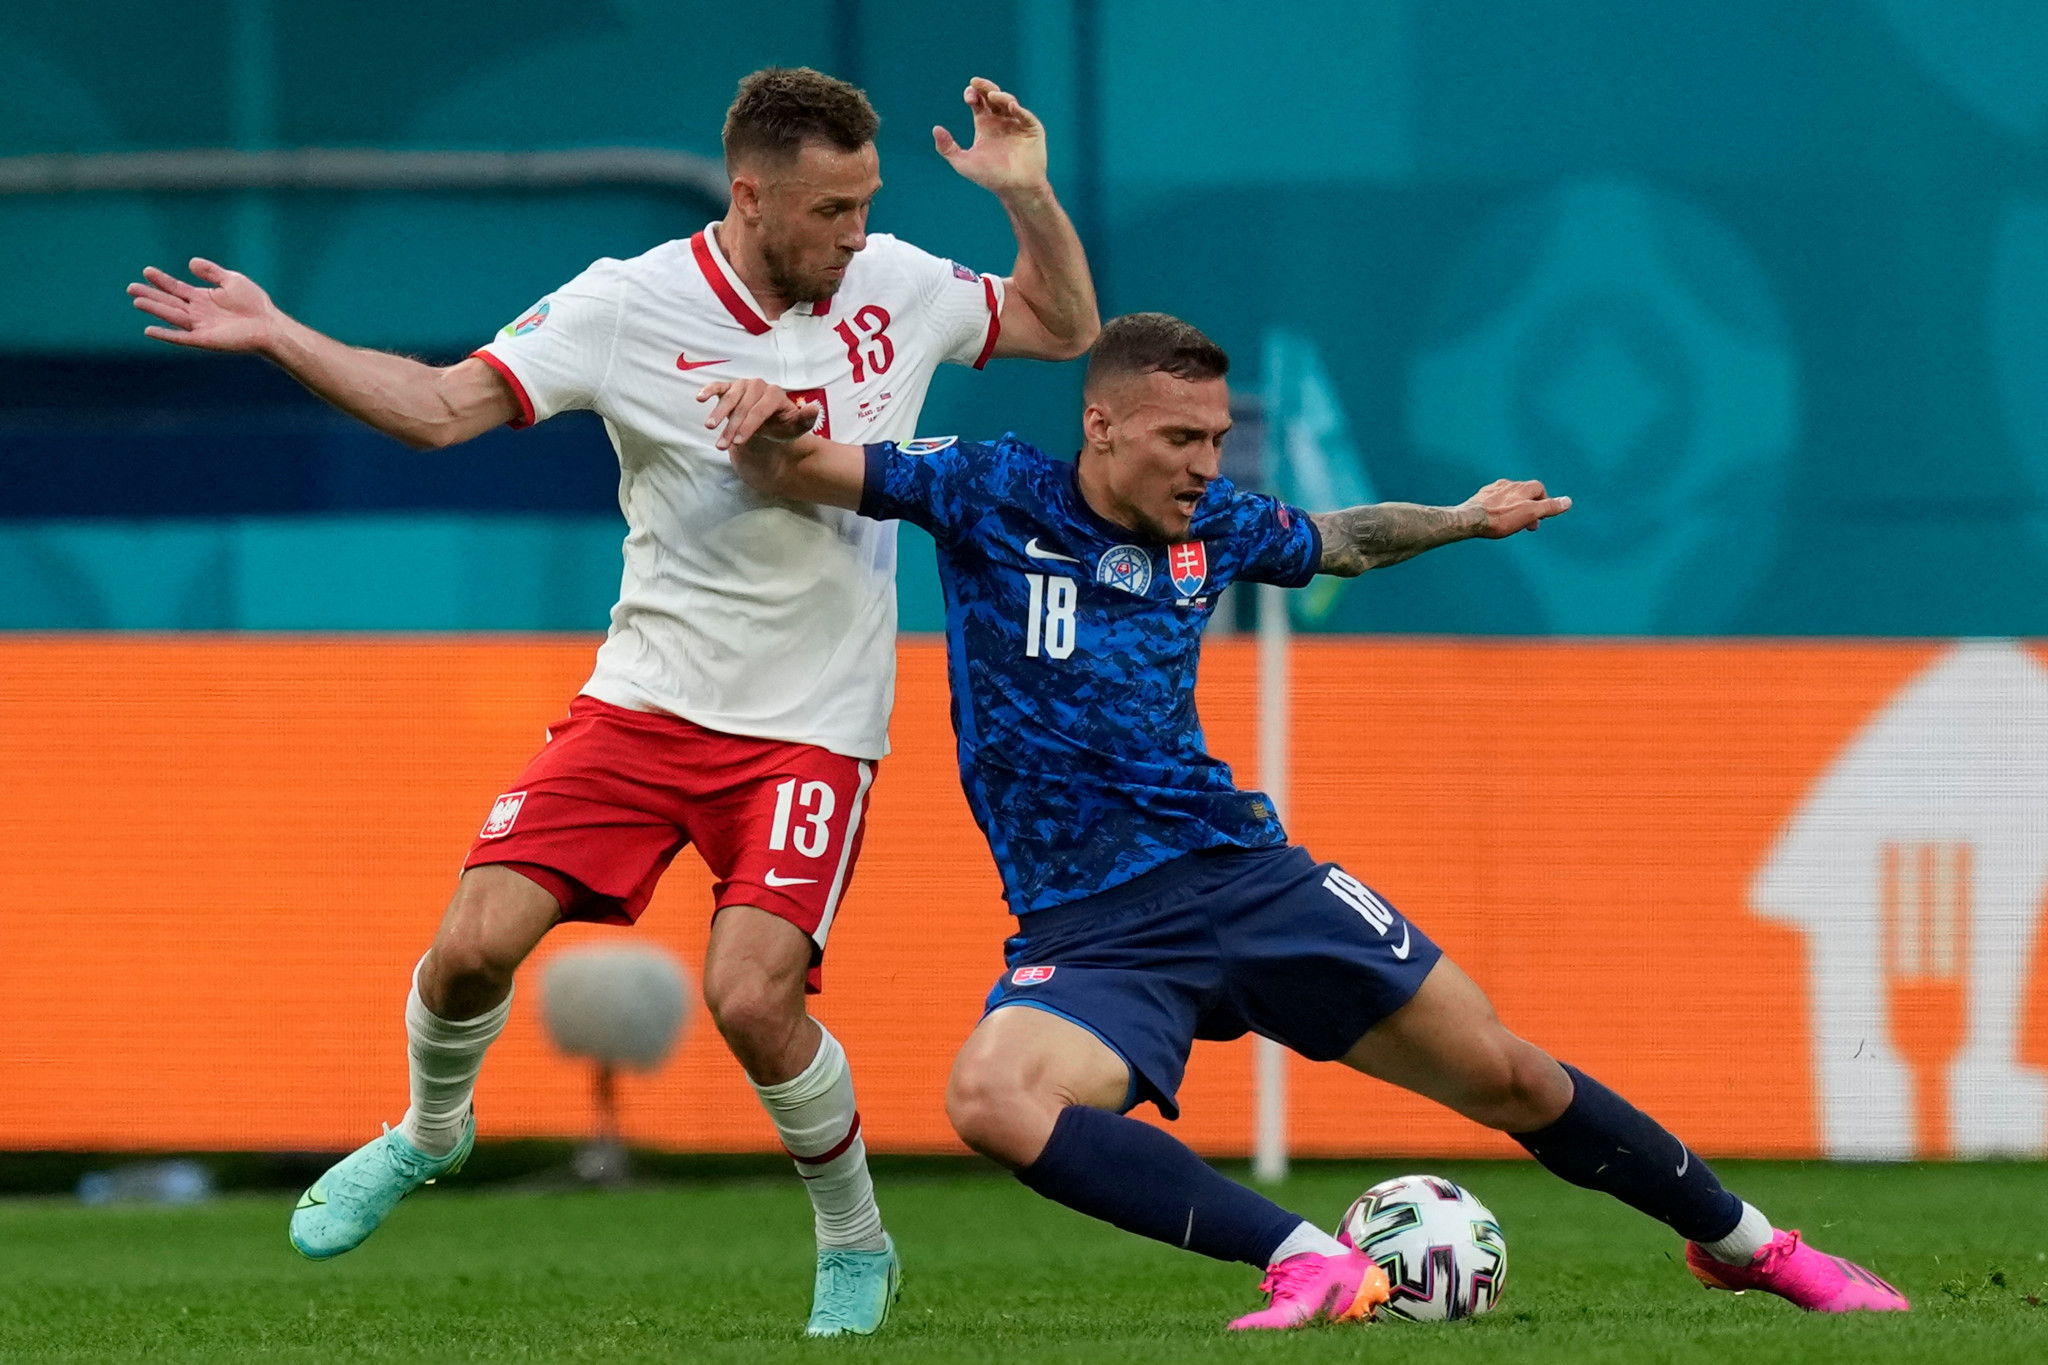 Maciej Rybus is one of Poland's most-capped defenders but has been overlooked for selection due to his move to Russian club Spartak Moscow ©Getty Images